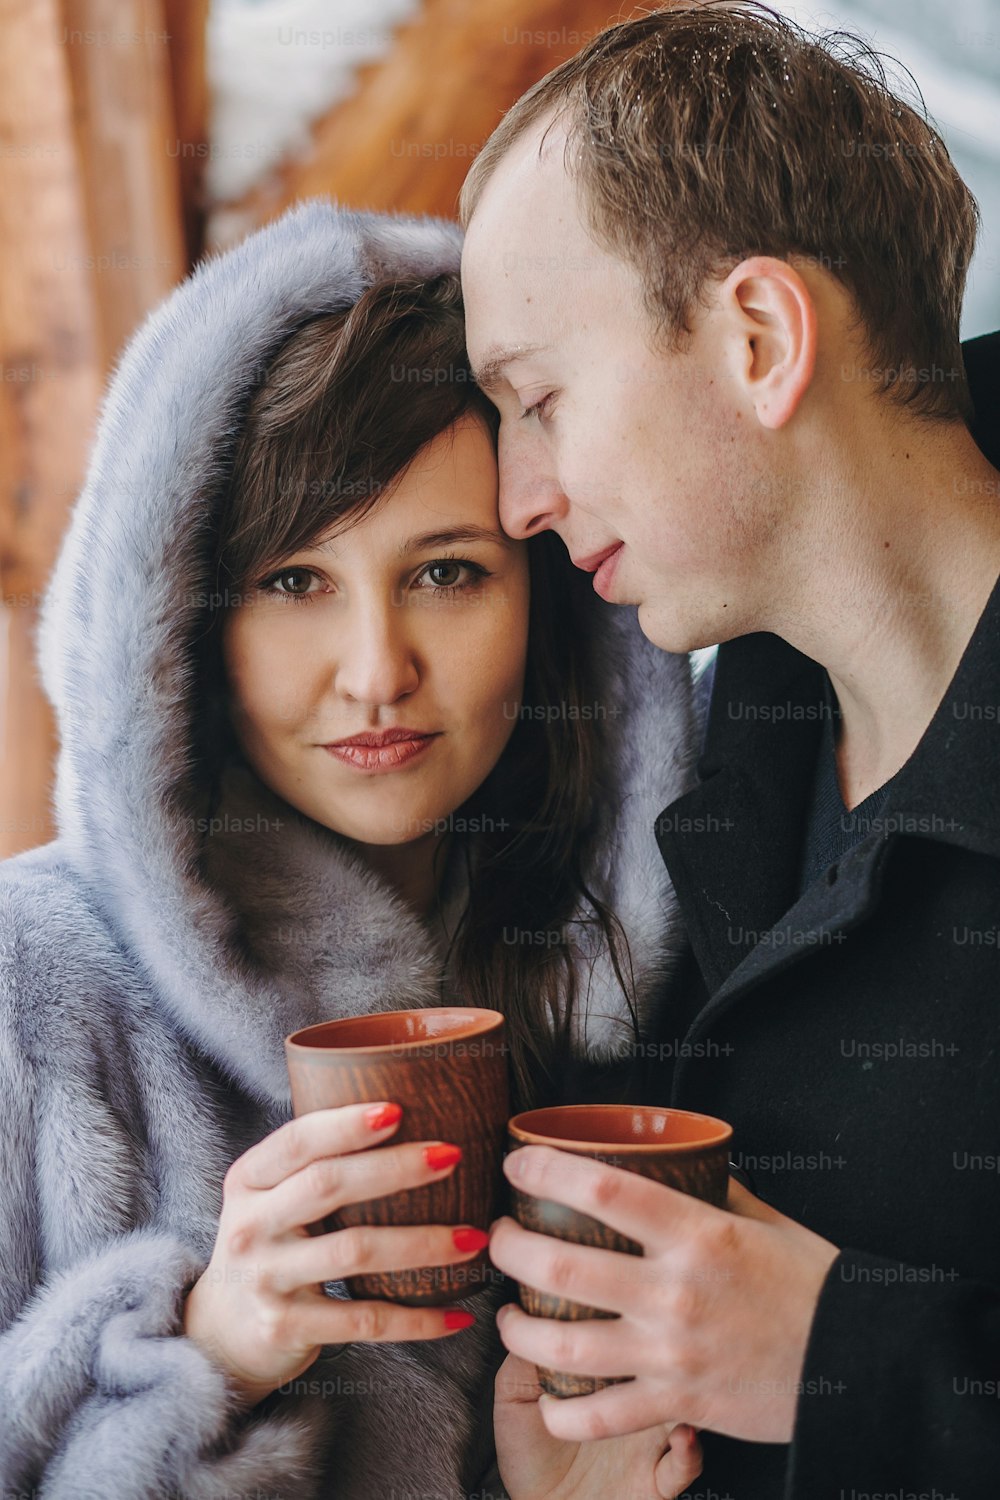 Stylish couple holding hot tea in cups and embracing on wooden porch in winter snowy mountains. Happy romantic family with drinks hugging. Holiday getaway together.